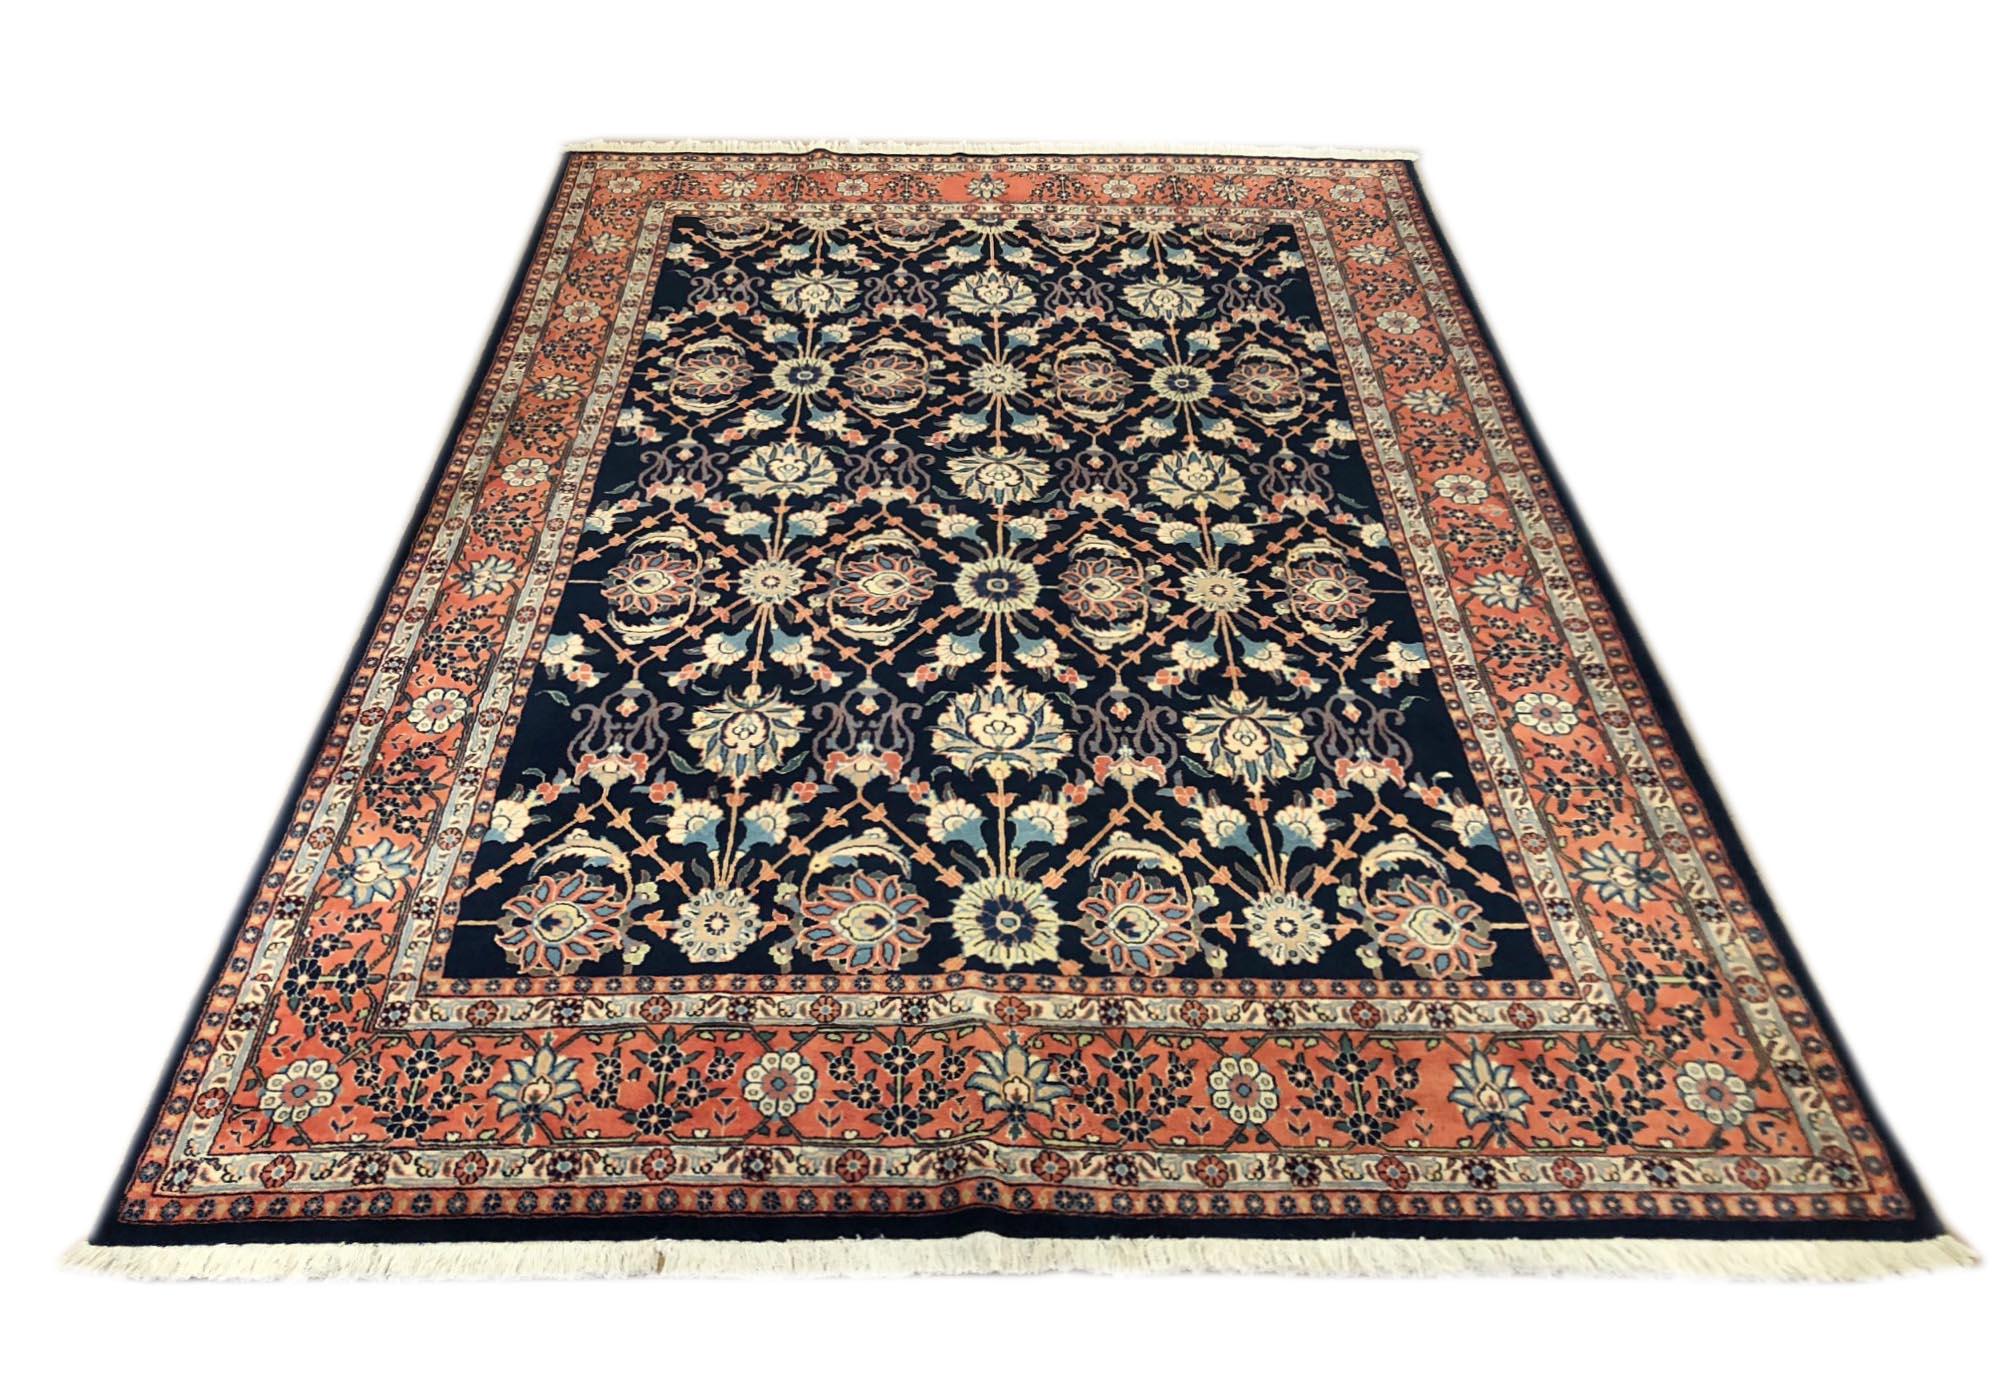 This Mahal rug stands as an incredibly vibrant and descriptive carpet and has wool pile with cotton foundation. The base color is dark blue and the border is salmon color. The size is 6 feet 7 inch by 9 feet 3 inches. This piece compliments your